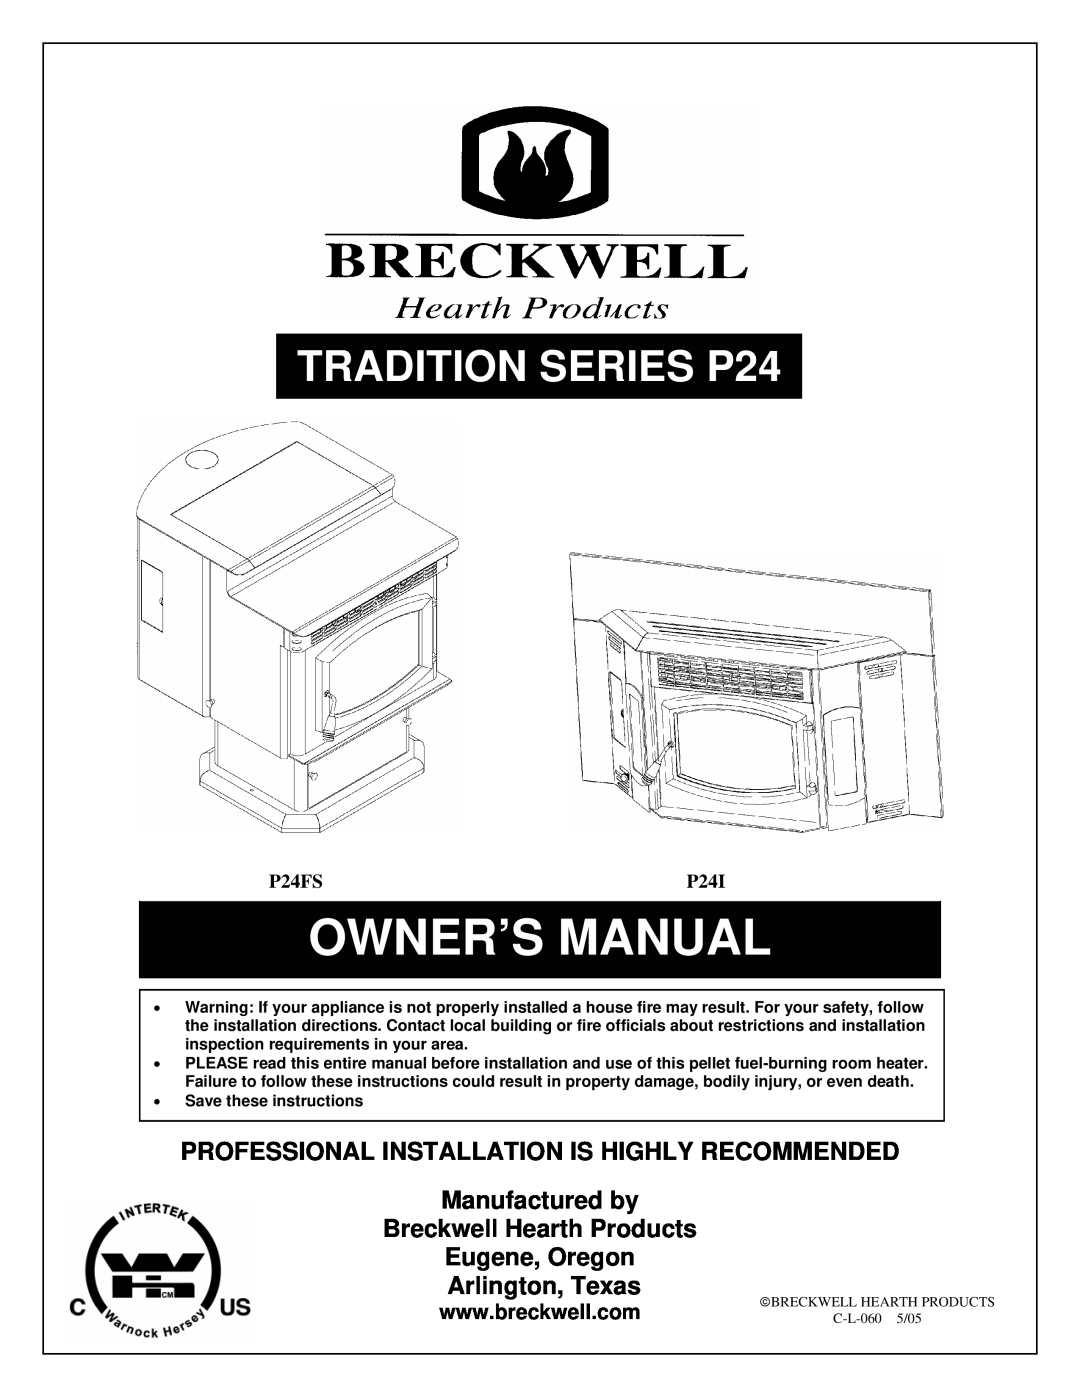 Breckwell P24FS owner manual Professional Installation Is Highly Recommended, Manufactured by Breckwell Hearth Products 